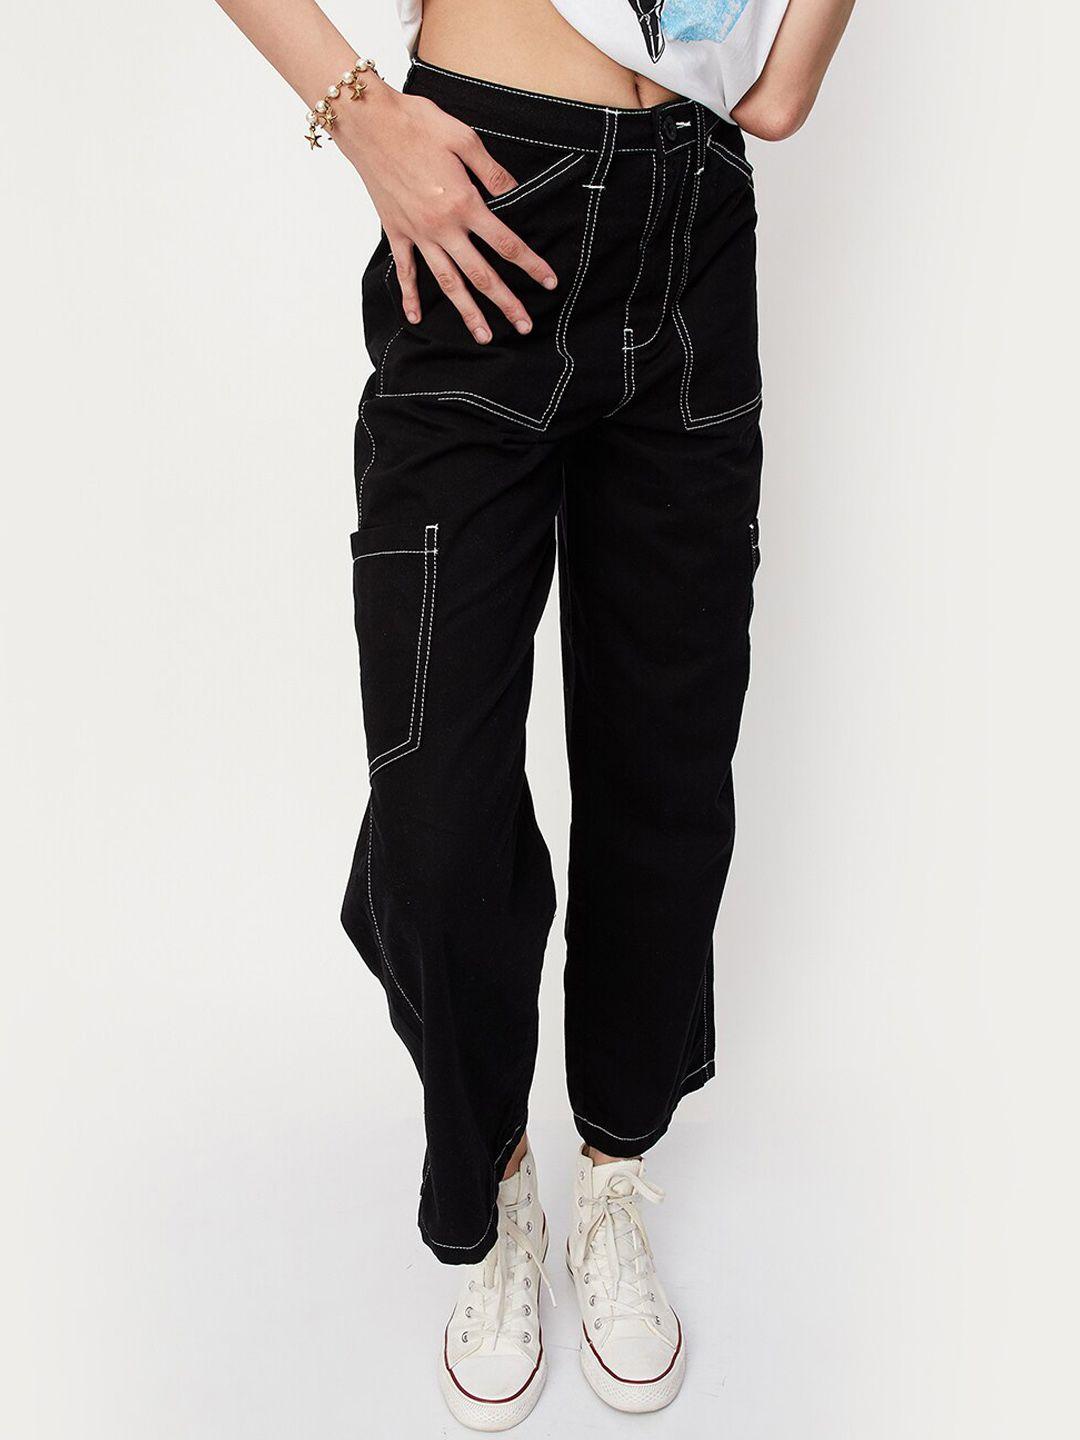 max-women-mid-rise-pure-cotton-parallel-trousers